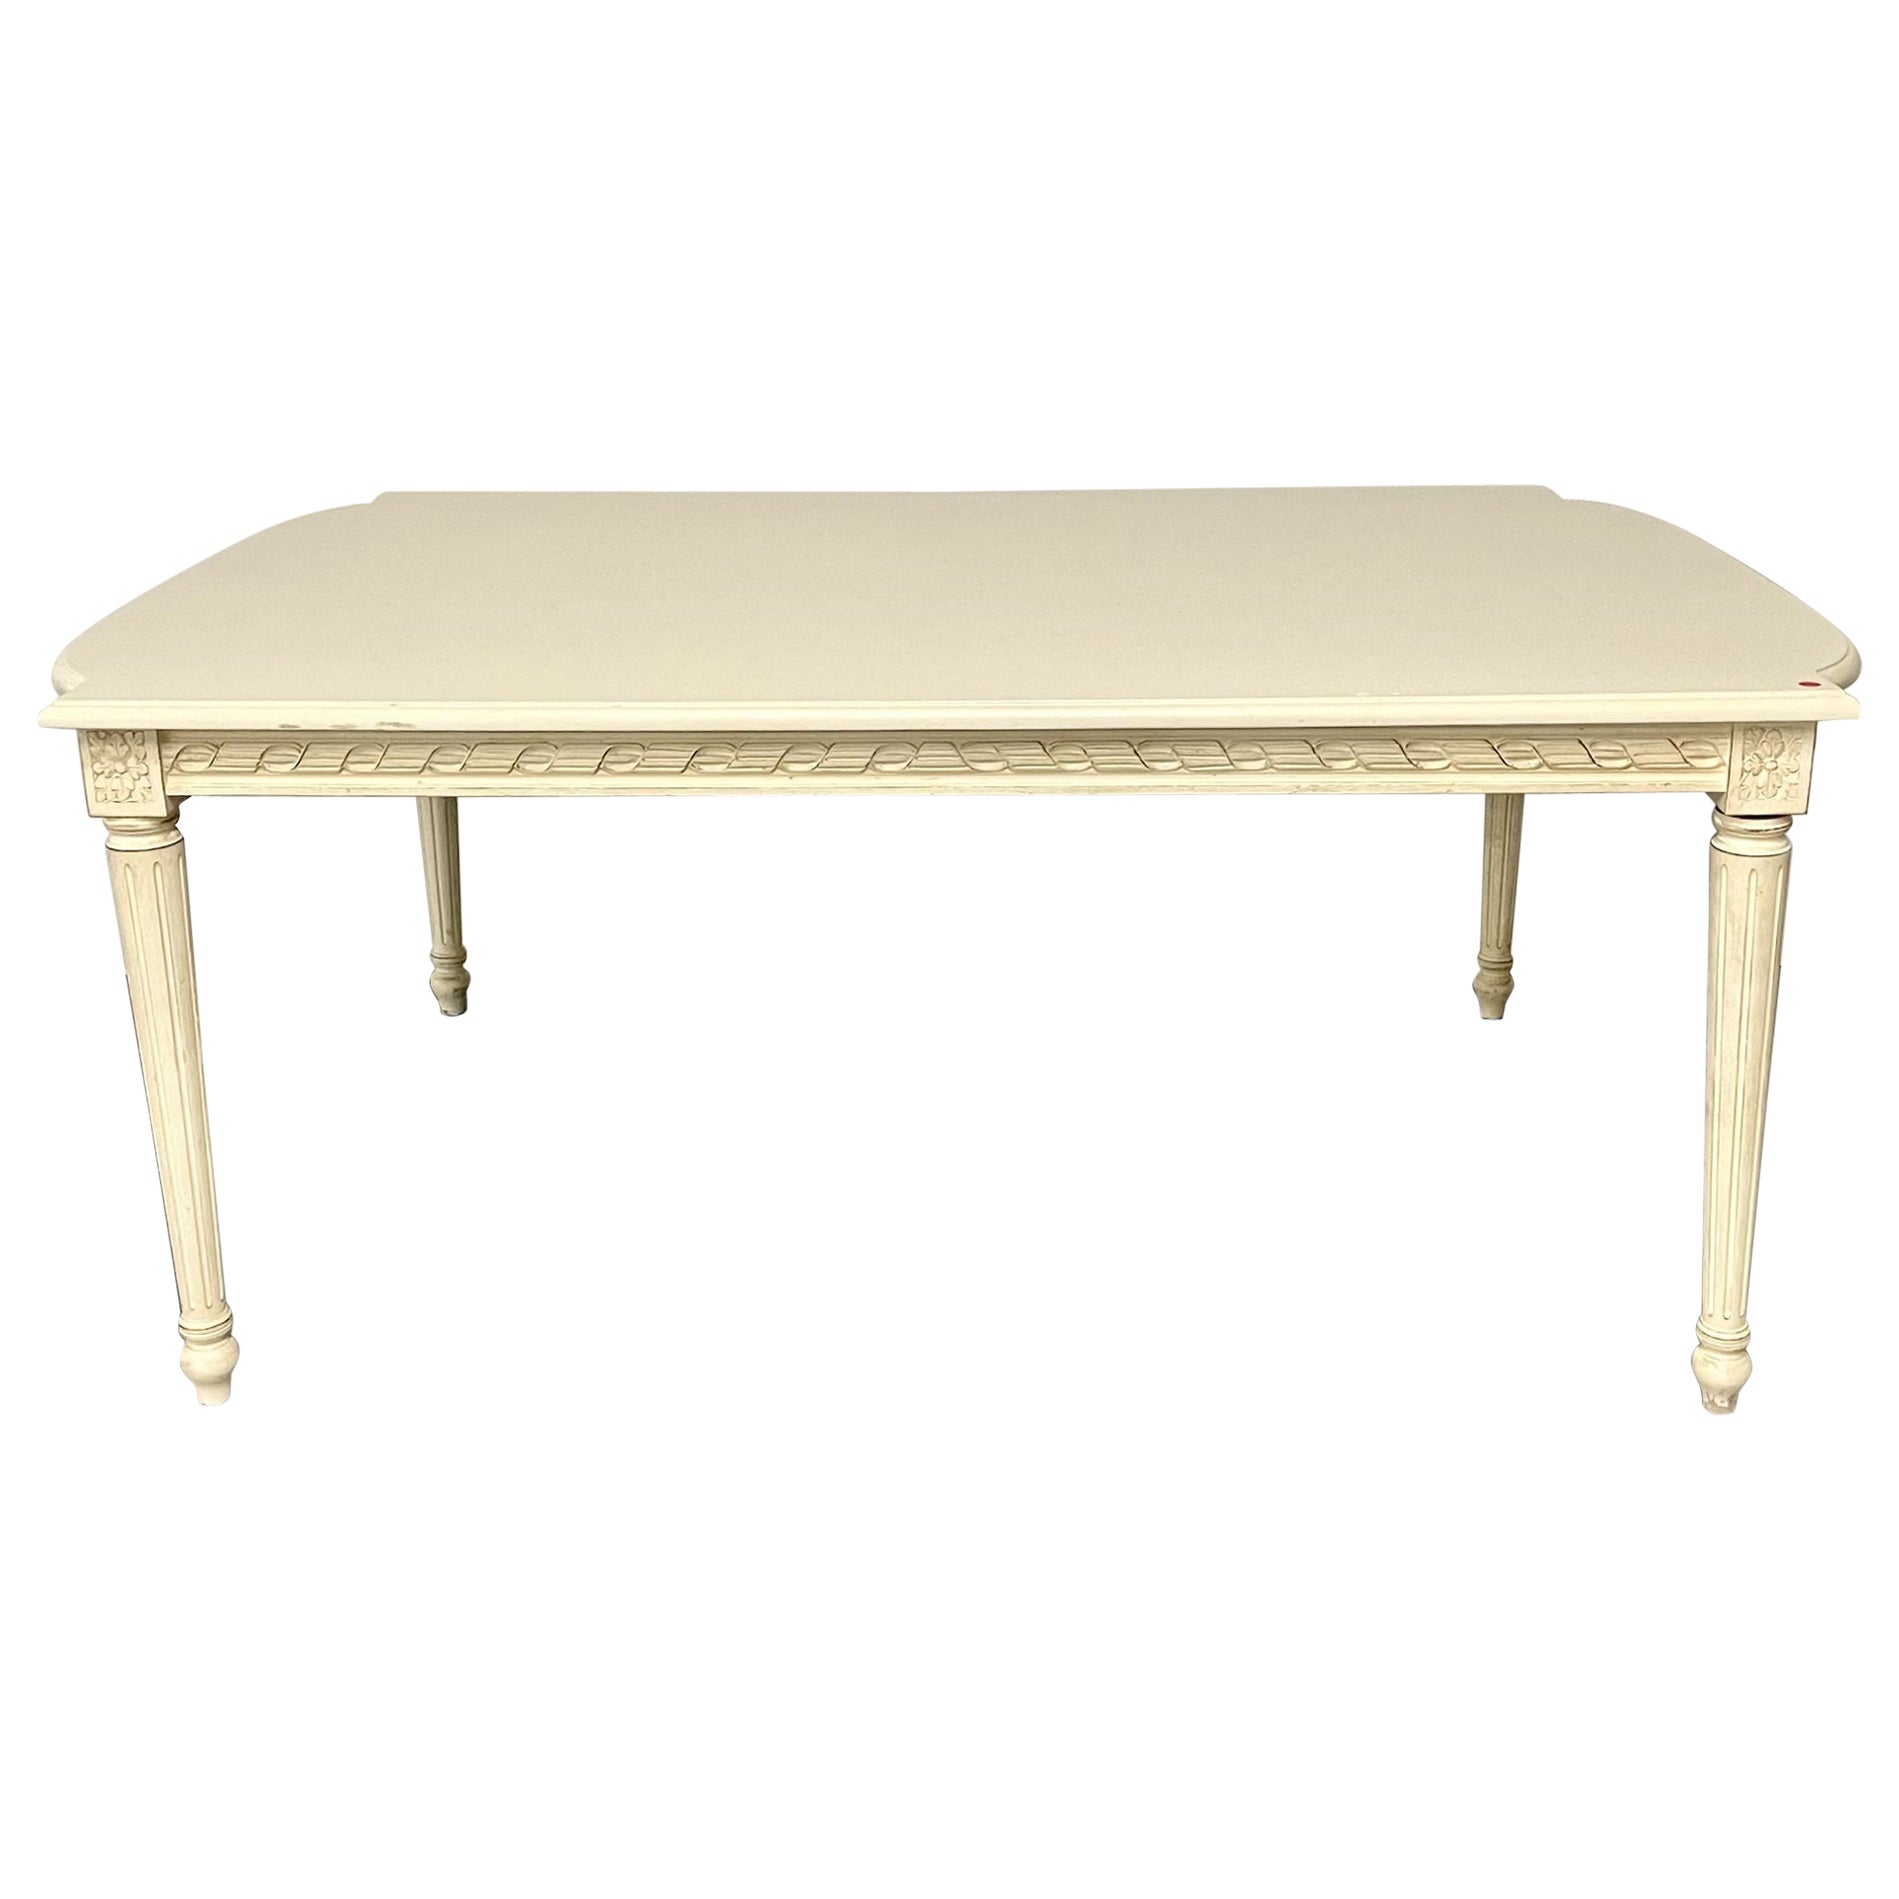 Louis XVI Style White Paint Decorated Dining / Kitchen Table, Gustavian